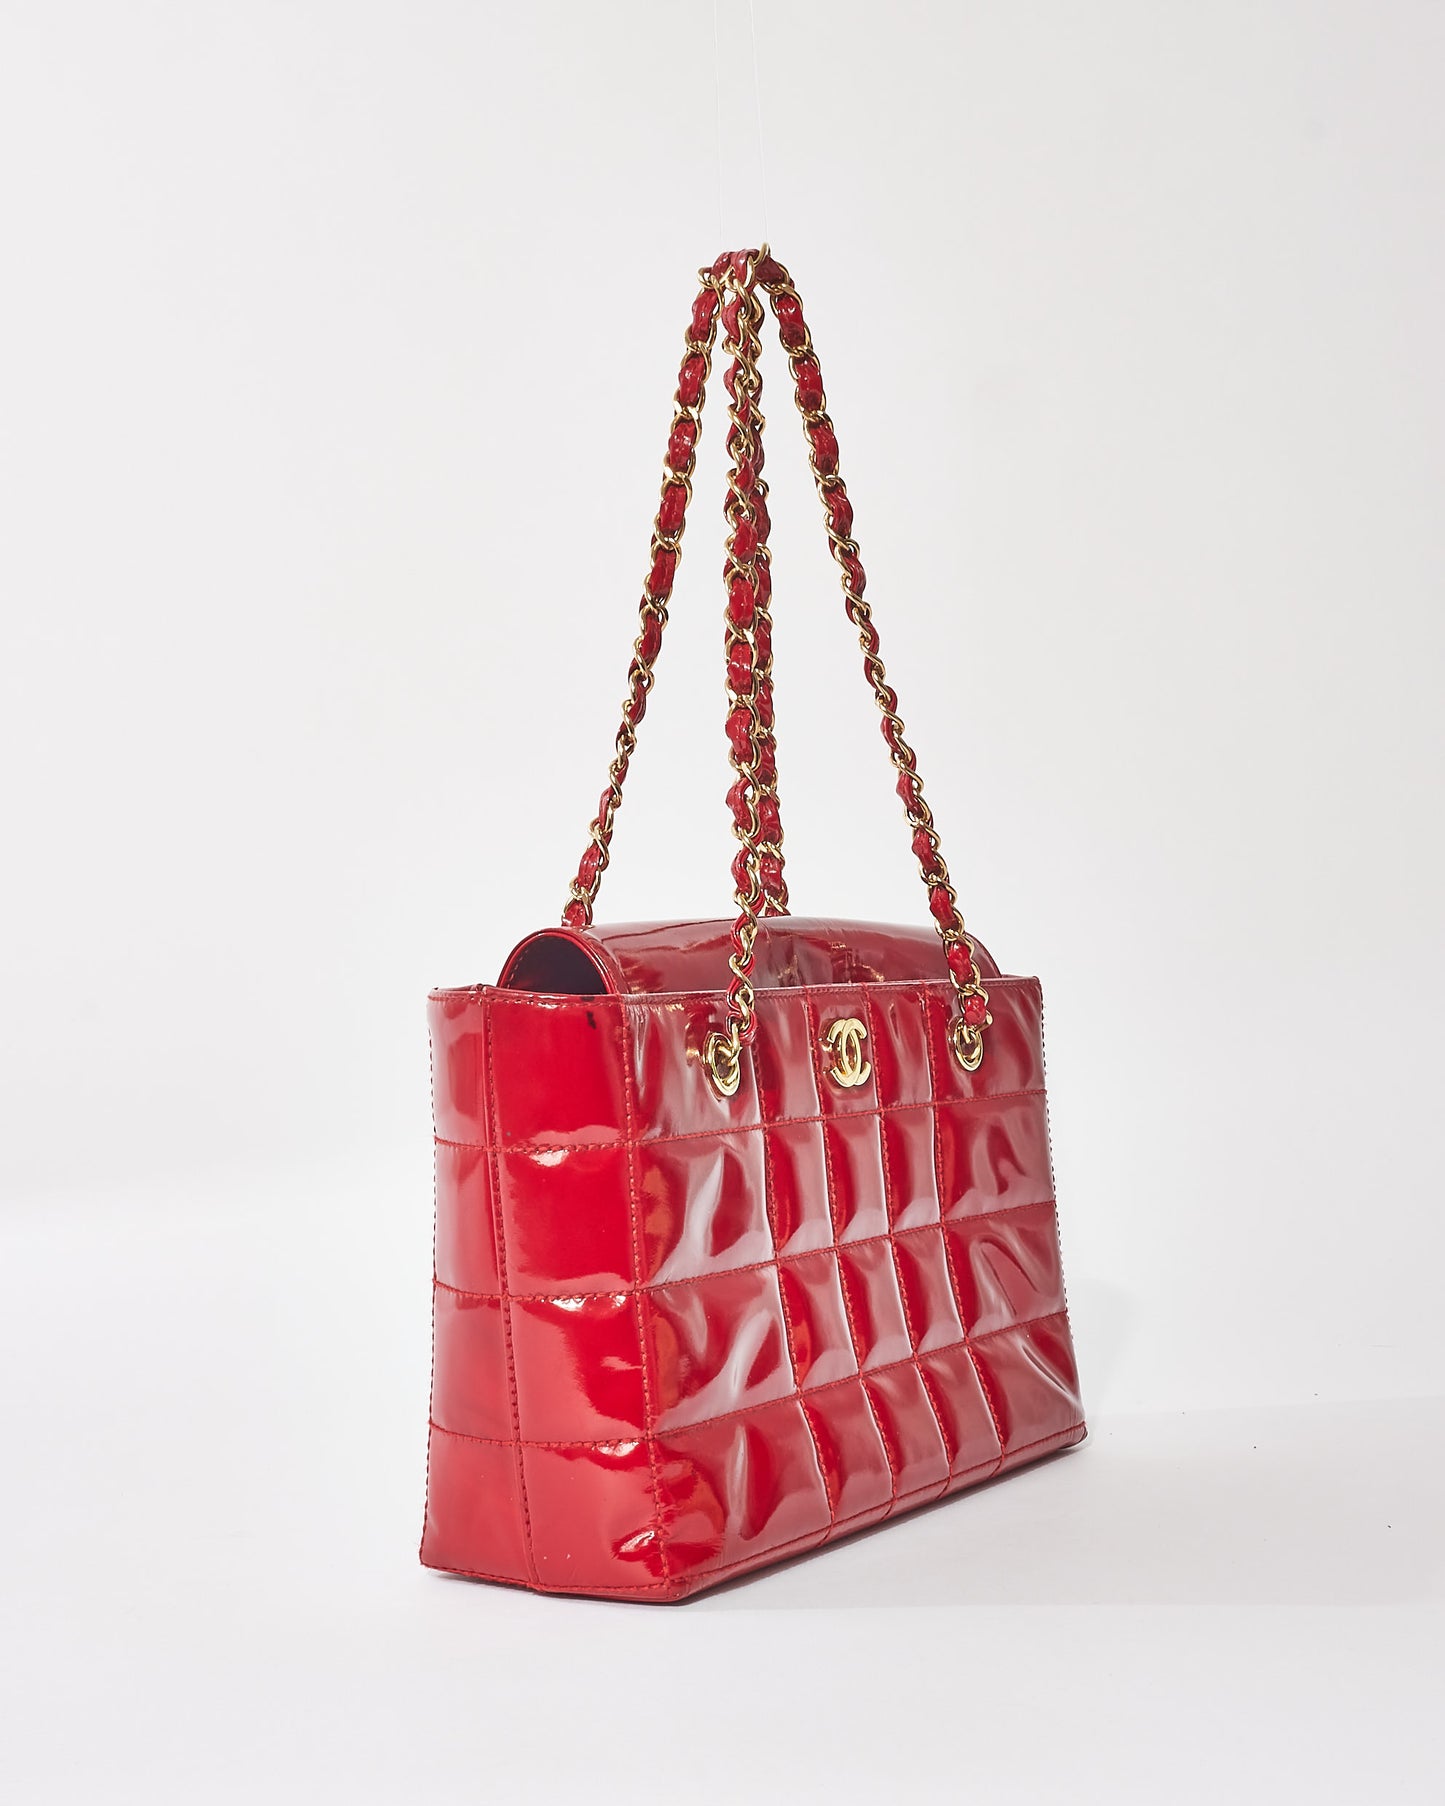 Chanel Vintage Red Patent Leather "Chocolate Bar" Tote Bag